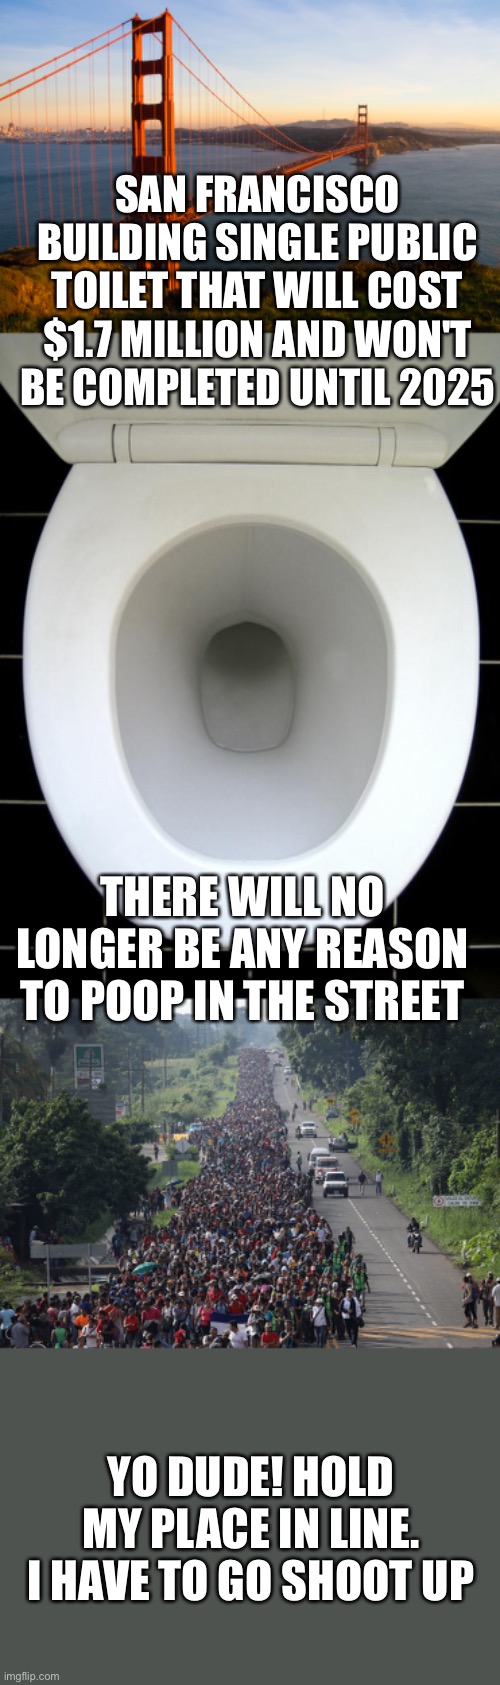 This why you should not elect democrats. How is that Build Back Better going for you? |  SAN FRANCISCO BUILDING SINGLE PUBLIC TOILET THAT WILL COST $1.7 MILLION AND WON'T BE COMPLETED UNTIL 2025; THERE WILL NO LONGER BE ANY REASON TO POOP IN THE STREET; YO DUDE! HOLD MY PLACE IN LINE. I HAVE TO GO SHOOT UP | image tagged in san francisco,toilet,millions,expensive | made w/ Imgflip meme maker